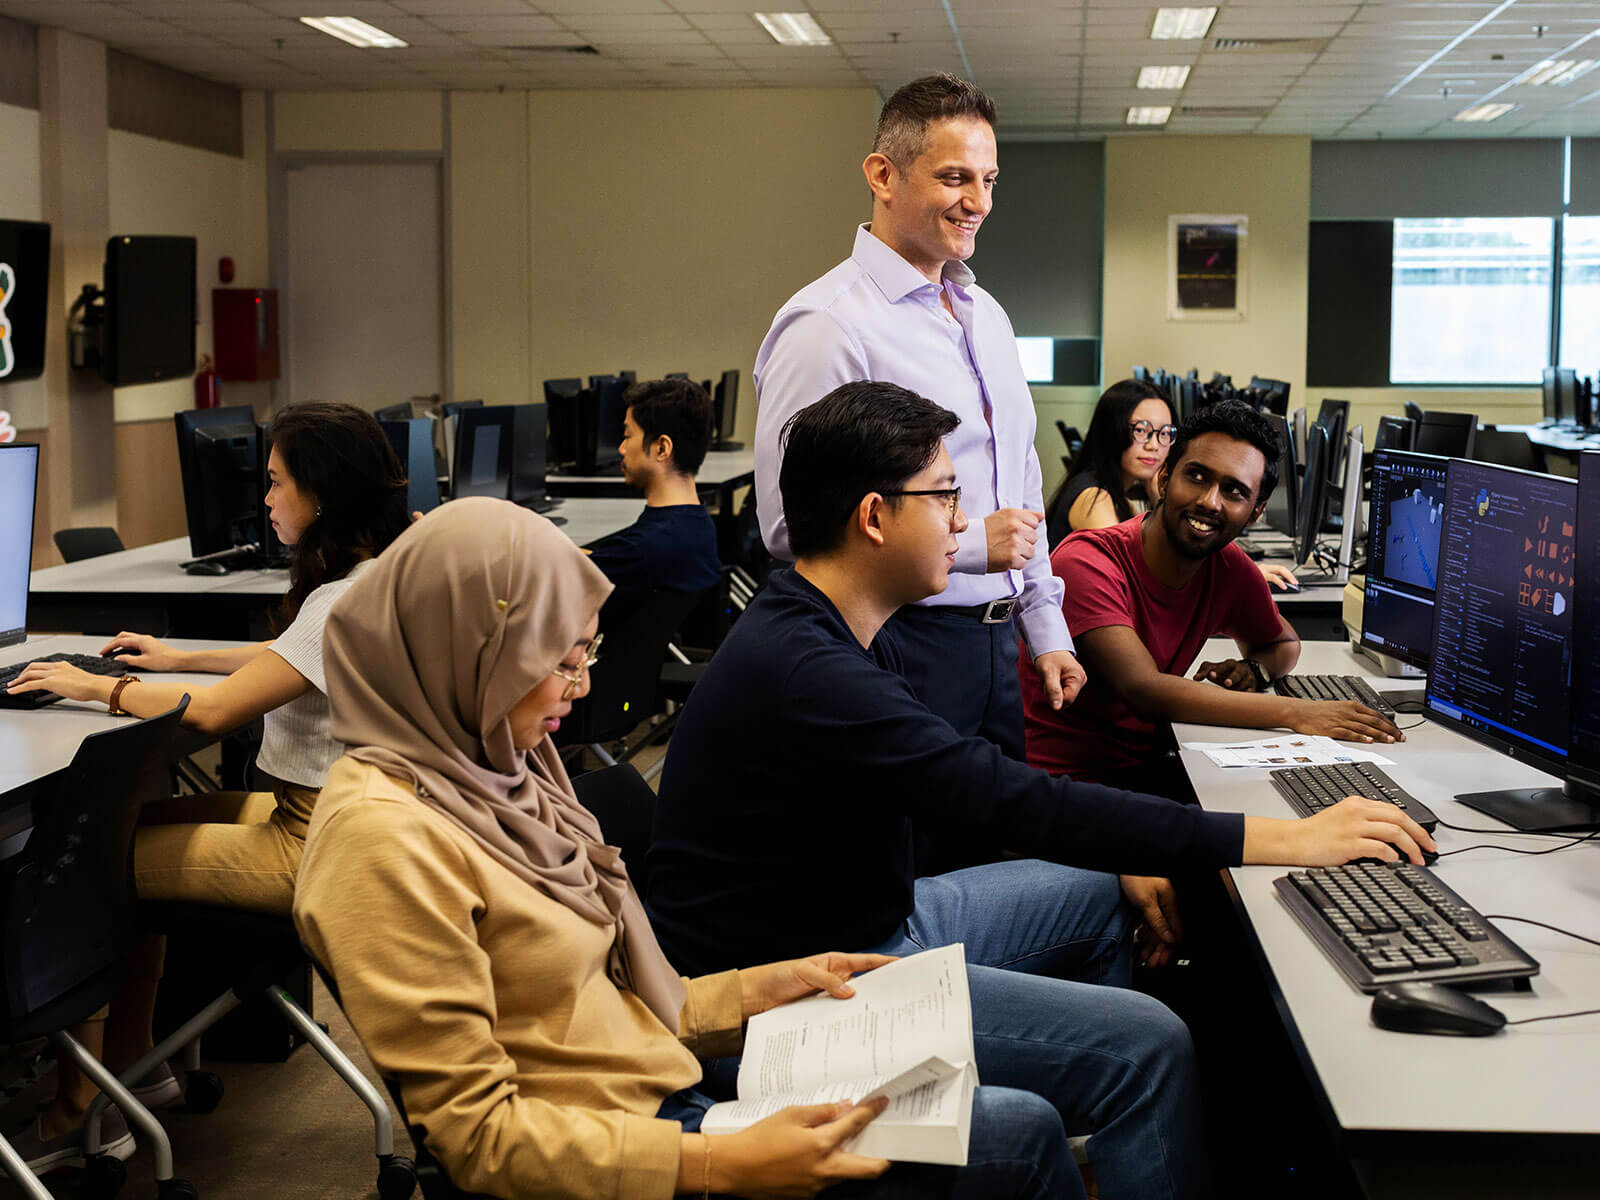 A DigiPen Singapore instructor stands and looks at a computer surrounded by students